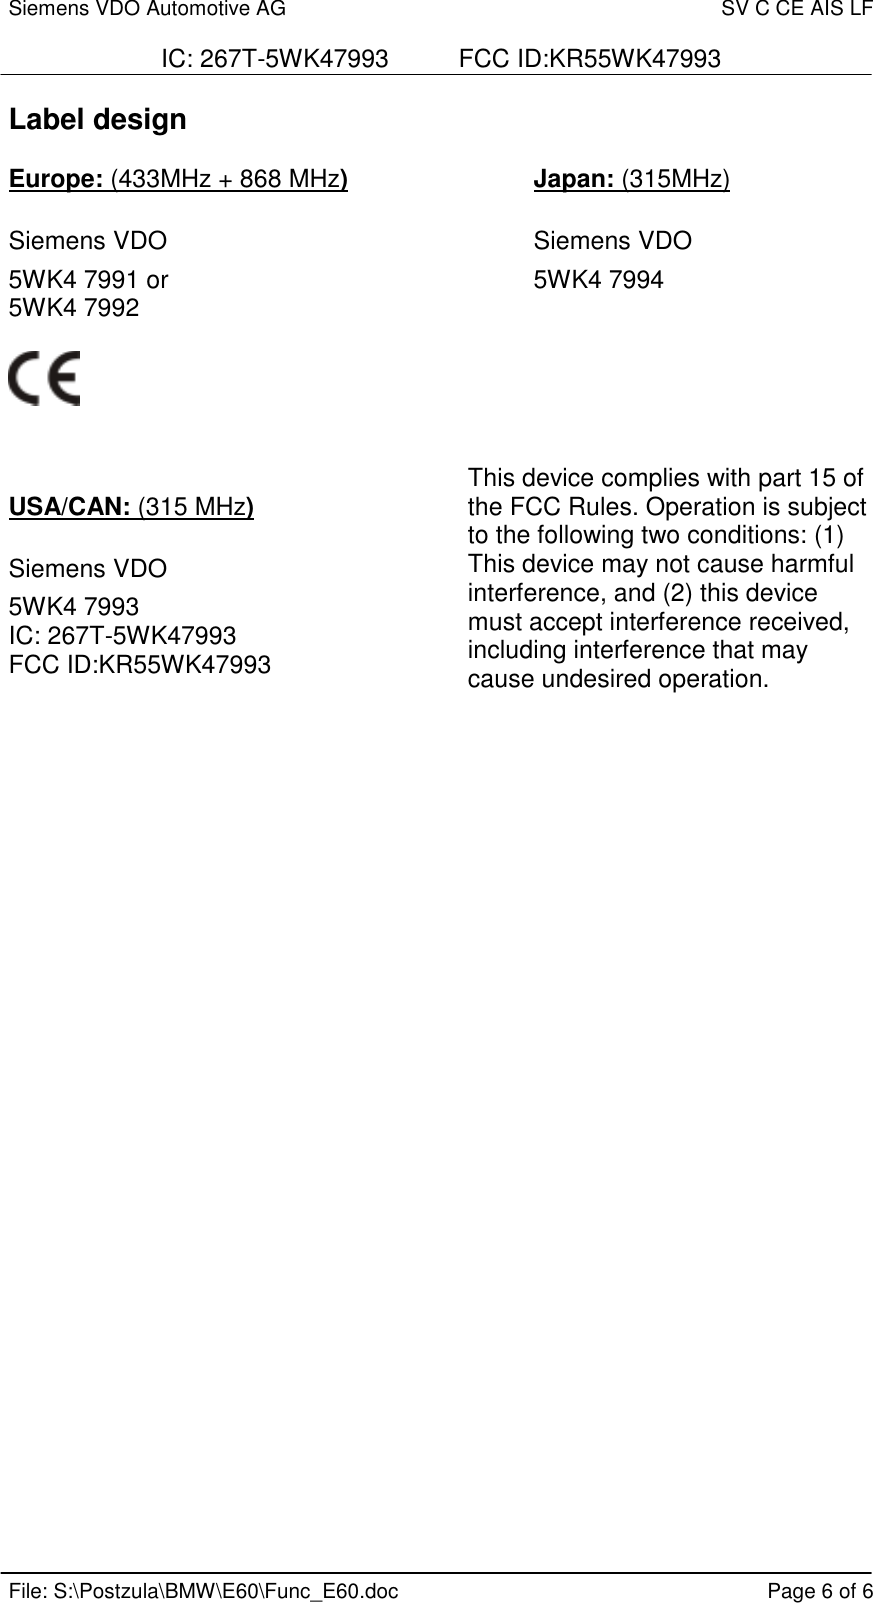 Siemens VDO Automotive AG SV C CE AIS LFIC: 267T-5WK47993          FCC ID:KR55WK47993File: S:\Postzula\BMW\E60\Func_E60.doc Page 6 of 6Label designEurope: (433MHz + 868 MHz) Japan: (315MHz)Siemens VDO Siemens VDO5WK4 7991 or         5WK4 79945WK4 7992USA/CAN: (315 MHz)Siemens VDO5WK4 7993IC: 267T-5WK47993FCC ID:KR55WK47993This device complies with part 15 ofthe FCC Rules. Operation is subjectto the following two conditions: (1)This device may not cause harmfulinterference, and (2) this devicemust accept interference received,including interference that maycause undesired operation.